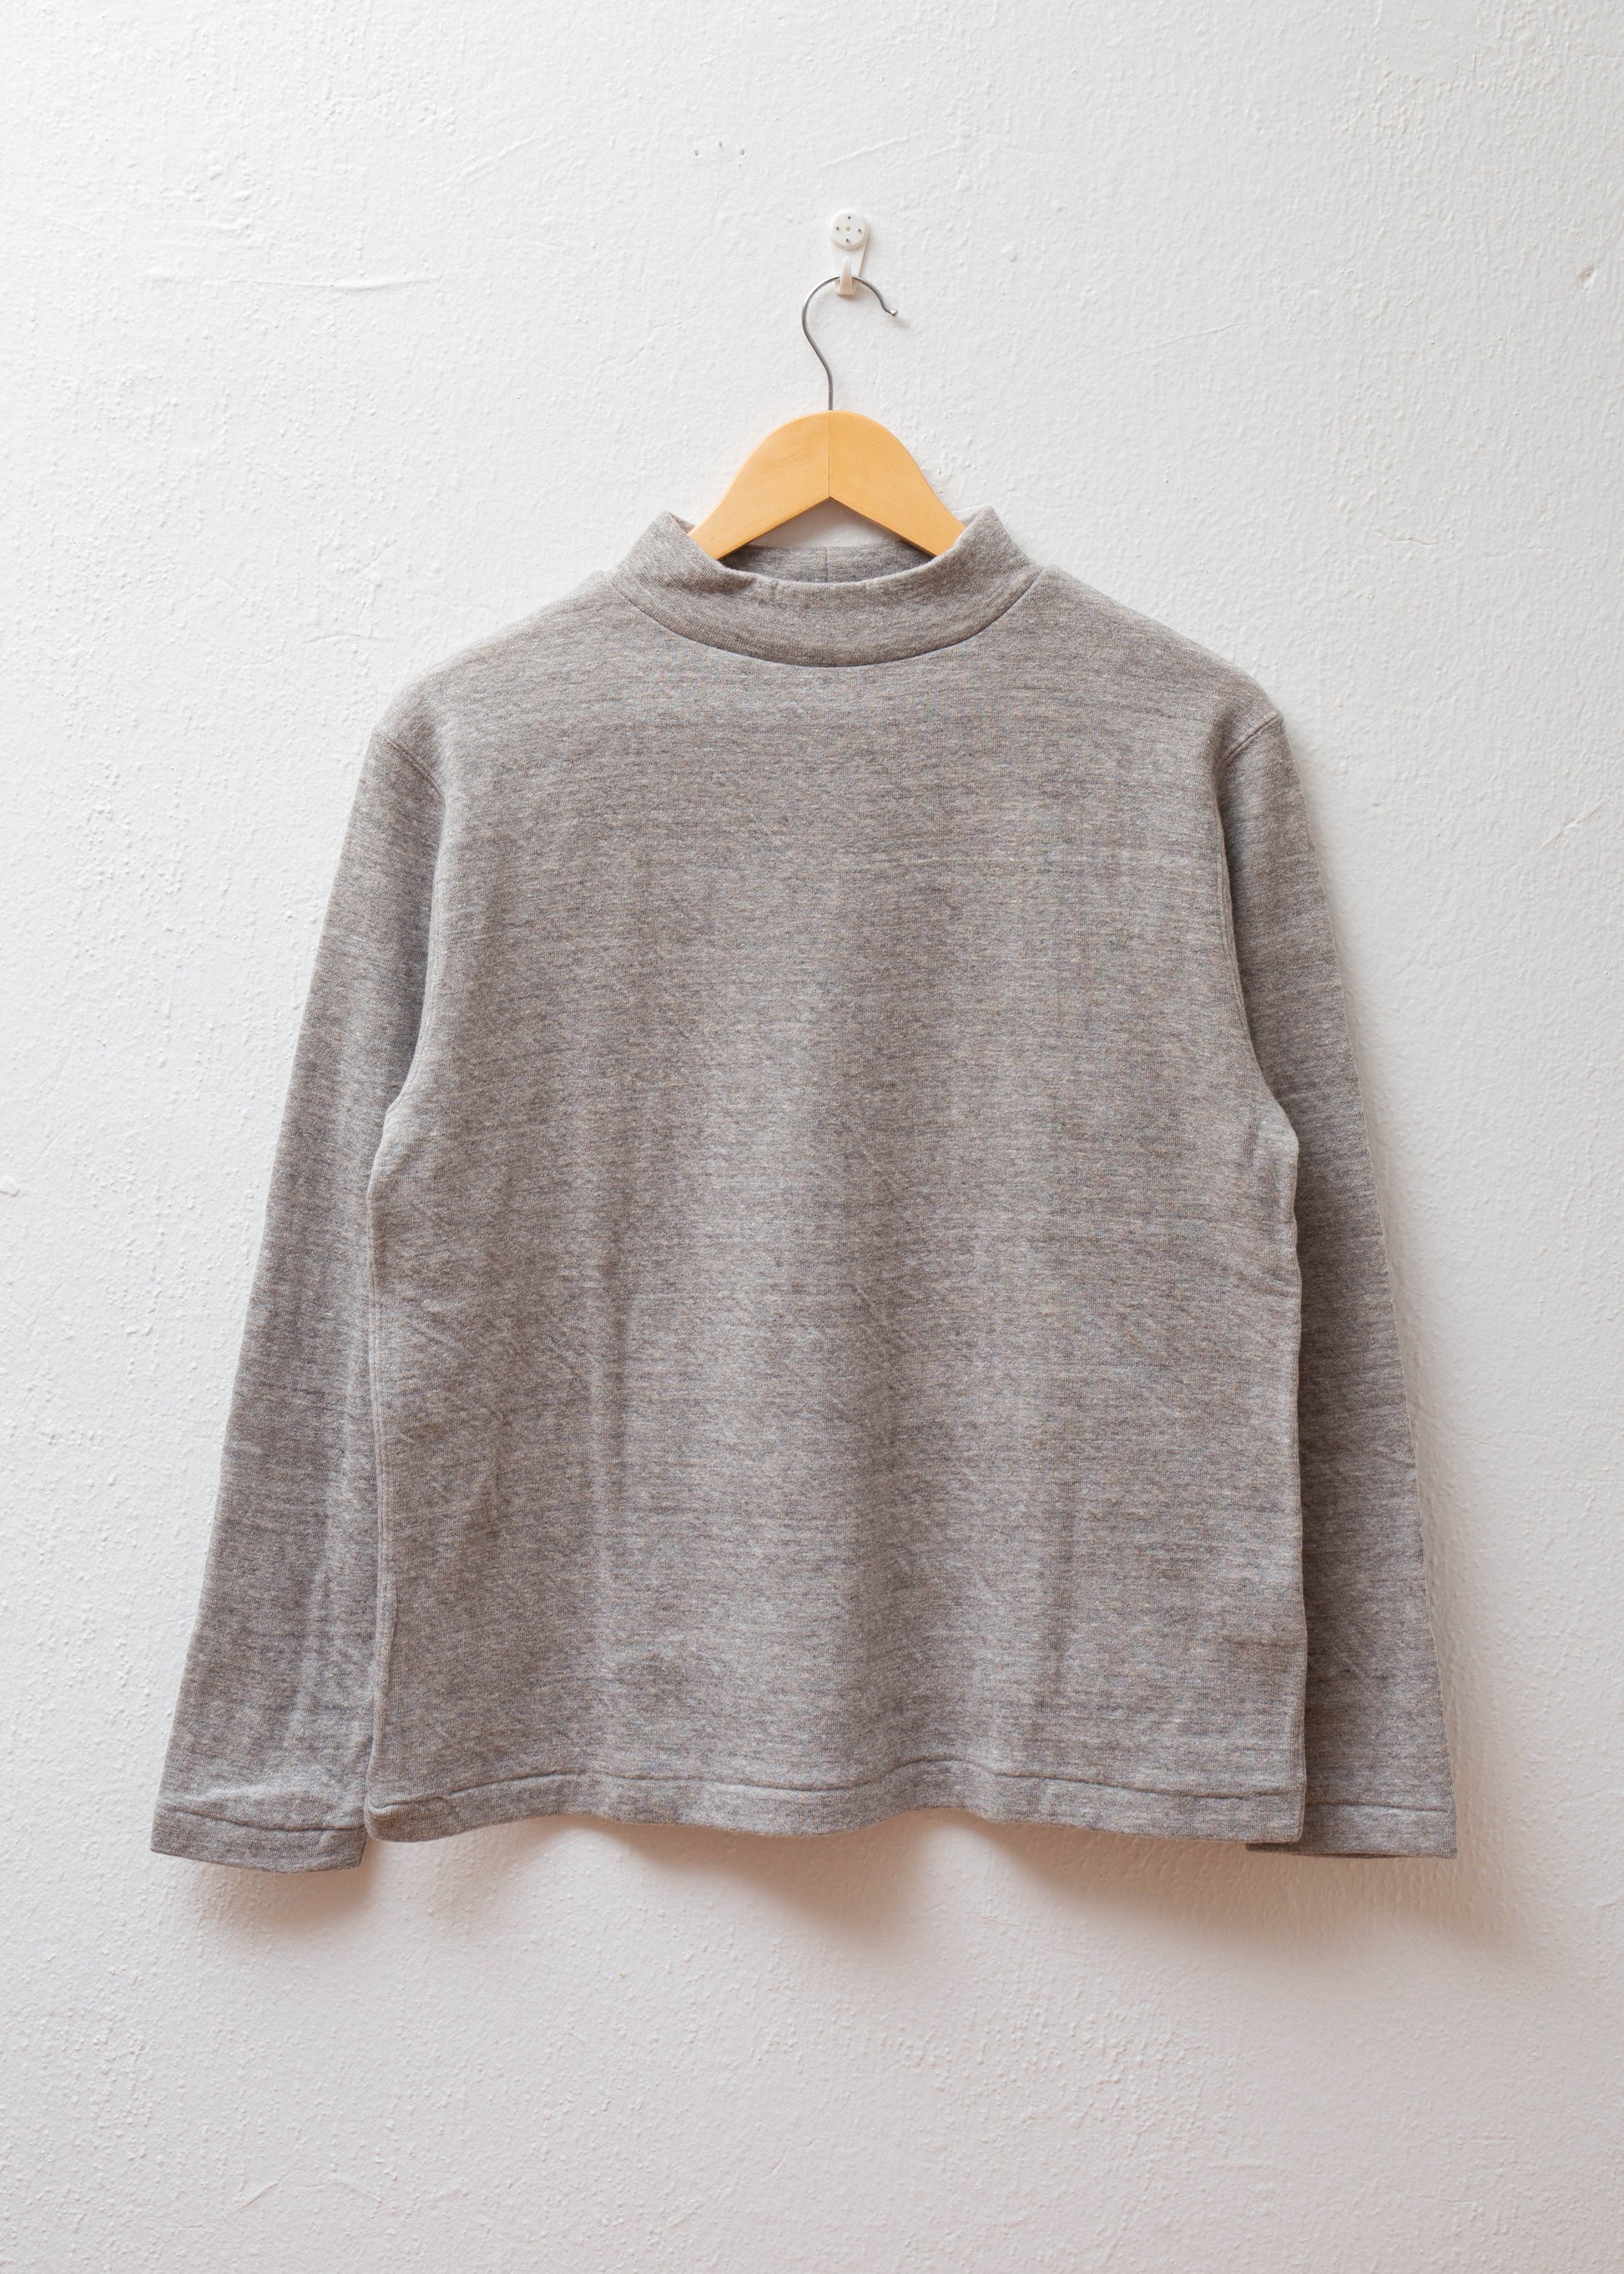 Mock Neck Pullover in color grey hanging on white wall